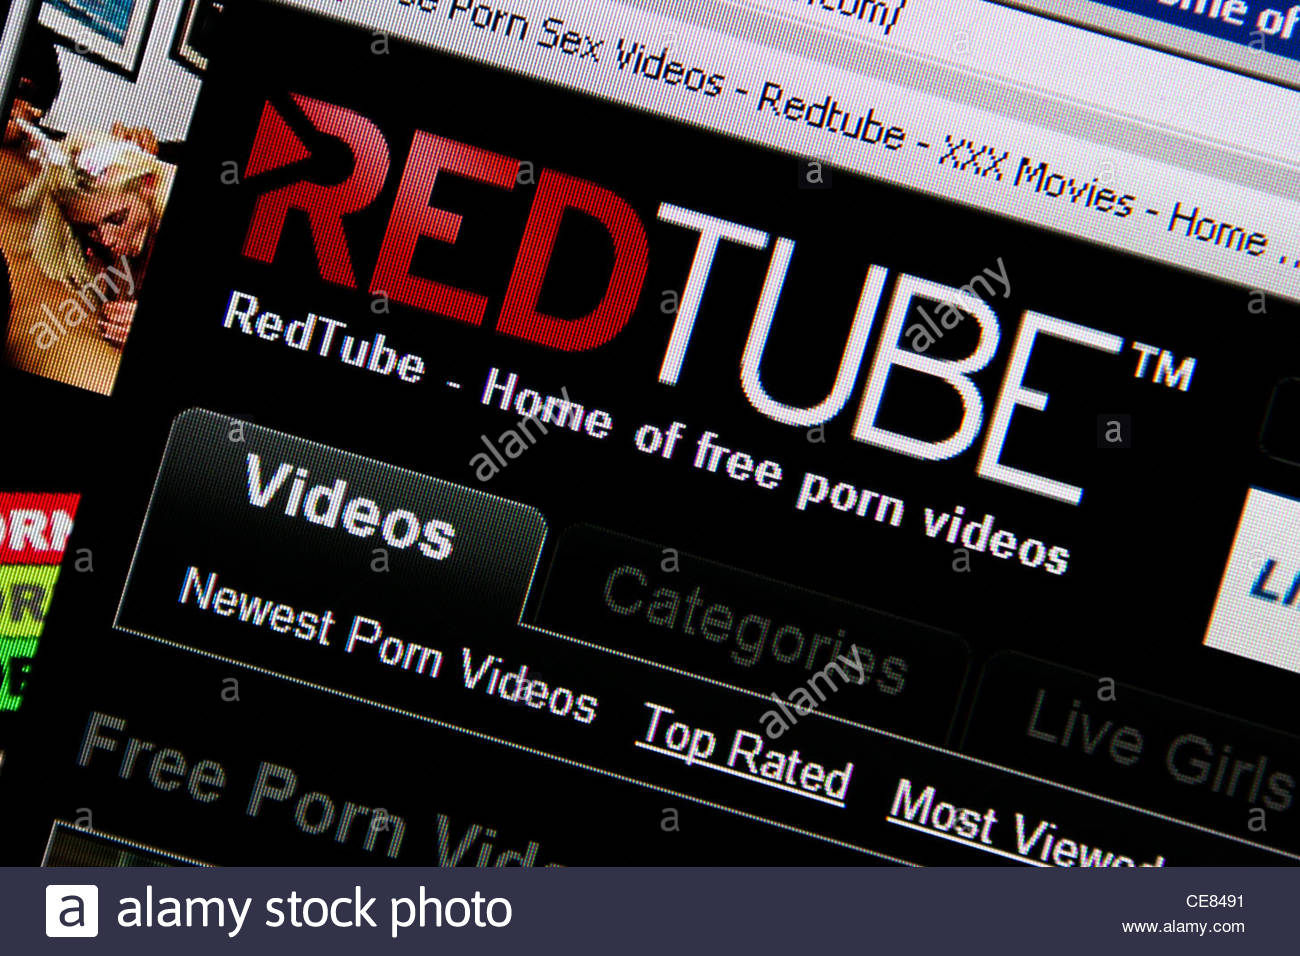 Red Tube Squirt 52